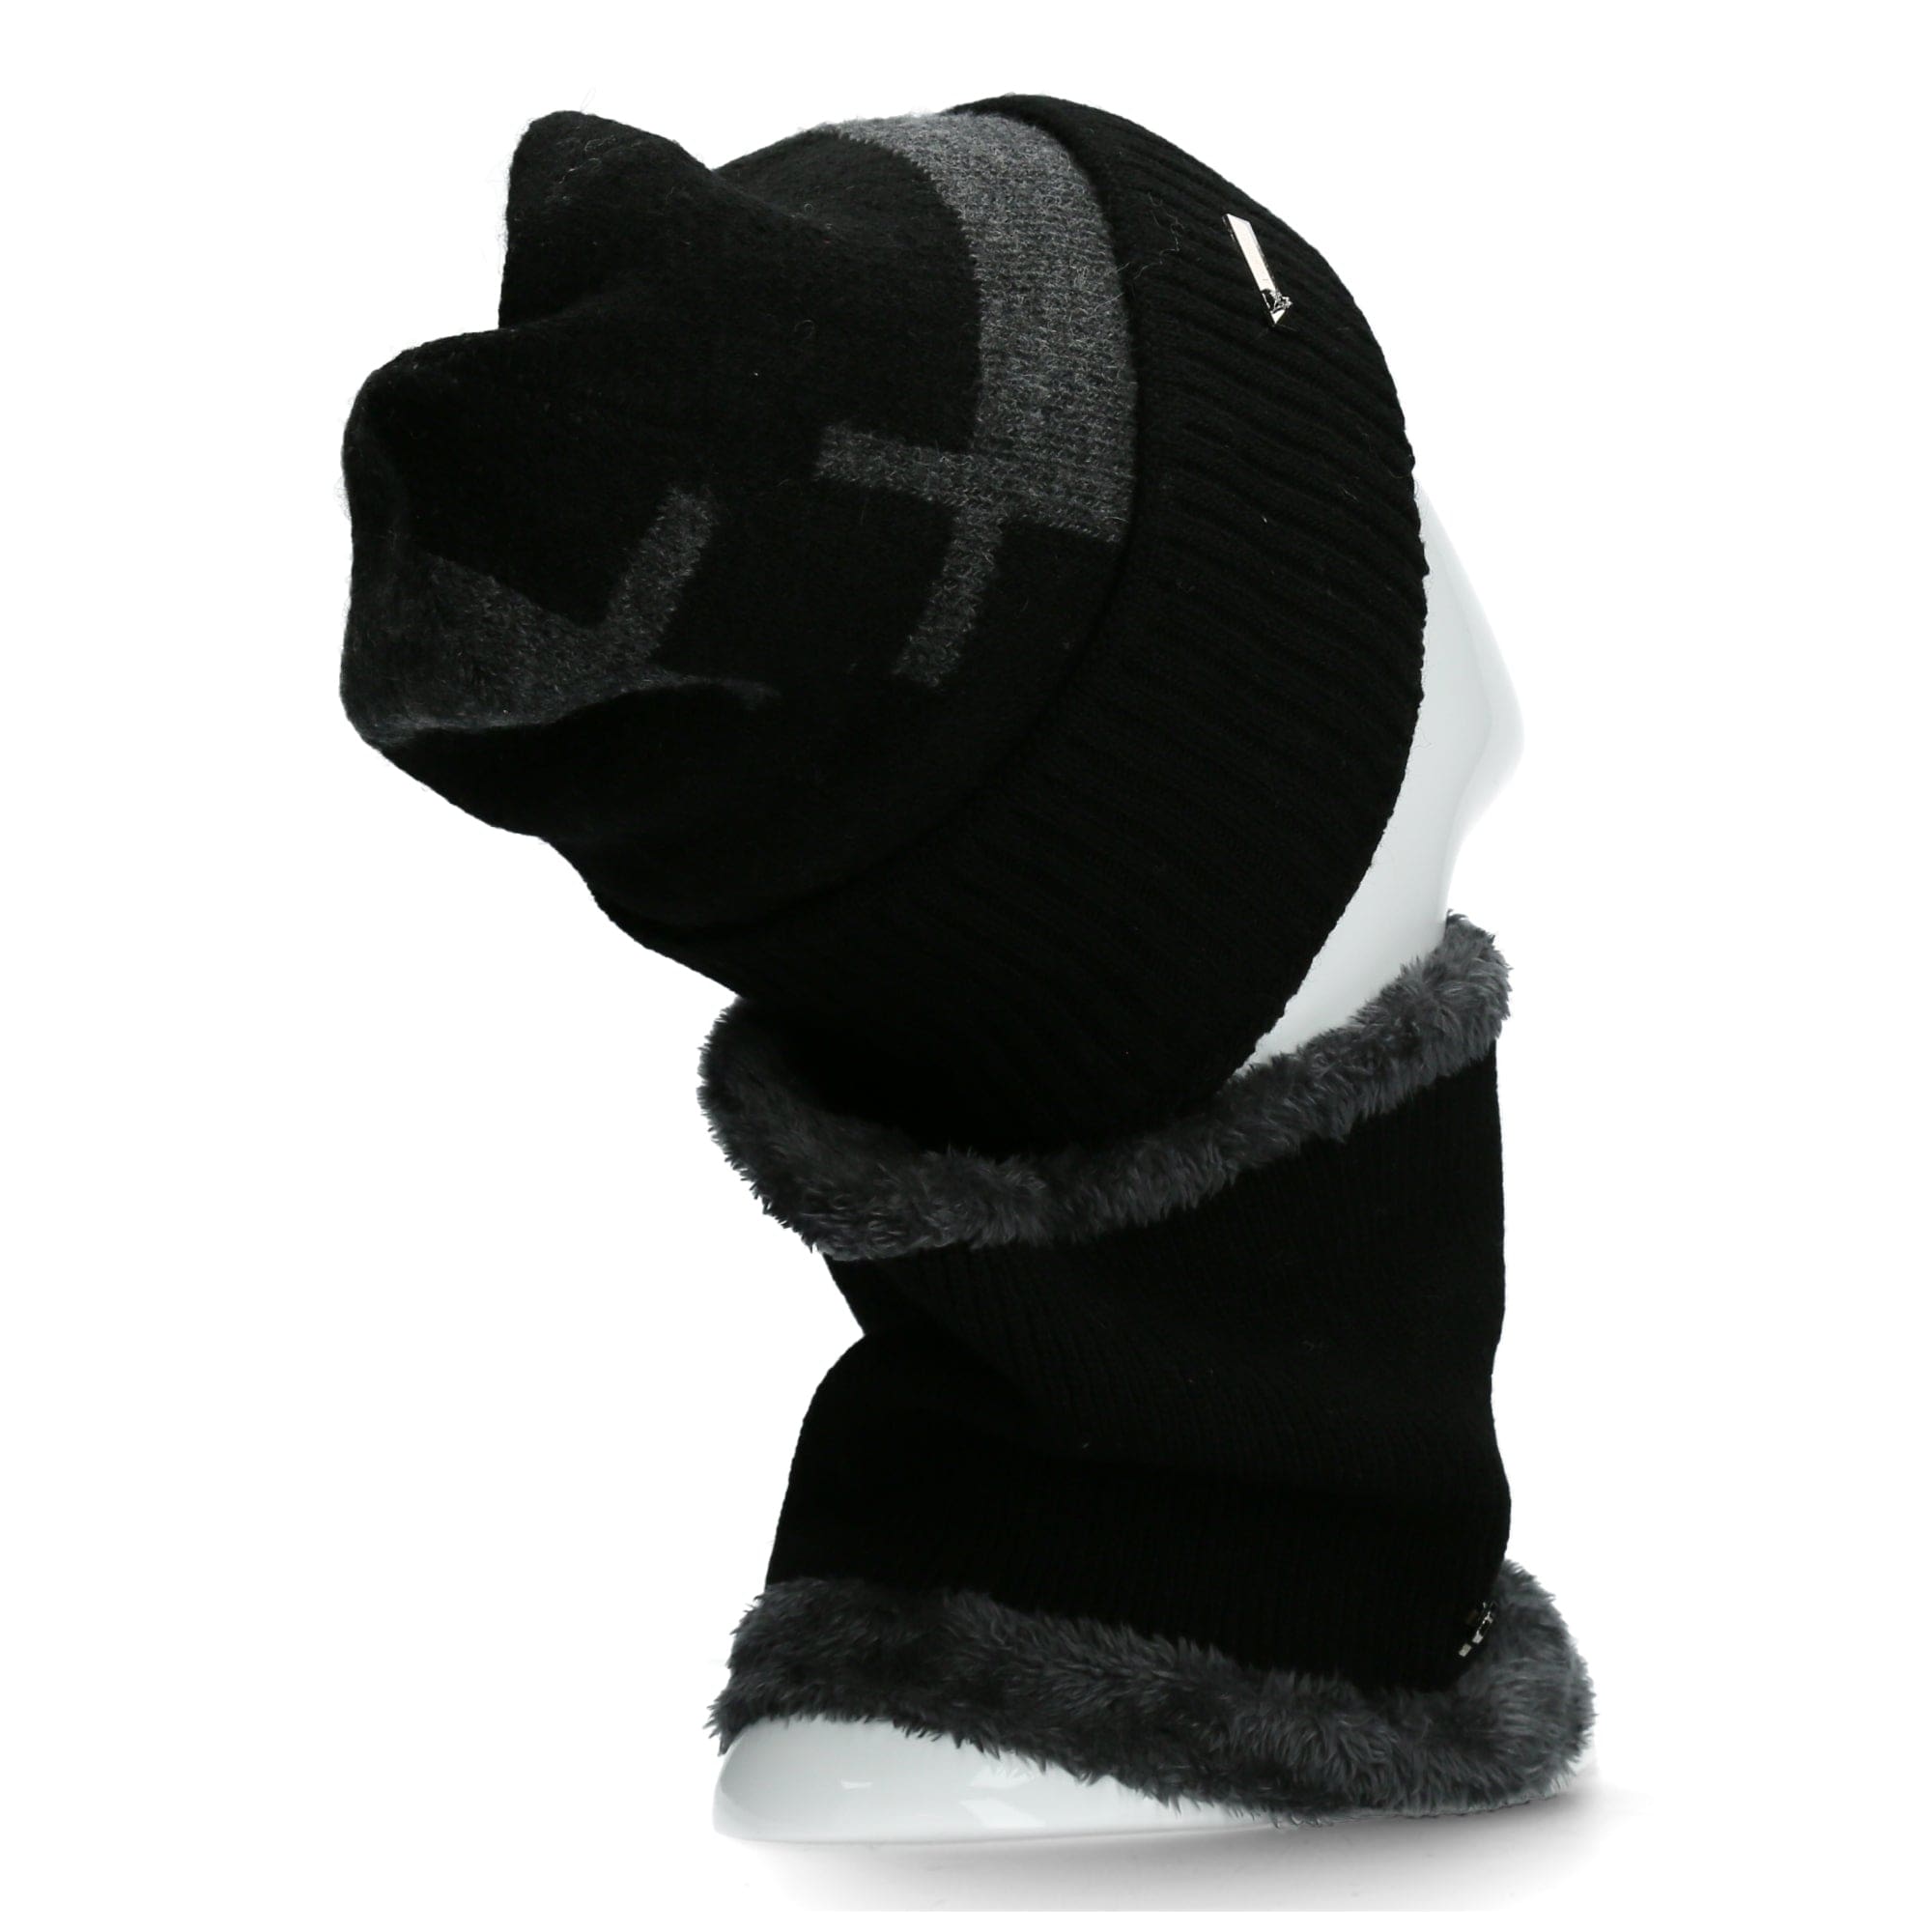 Duo hat and neck warmer with geo motifs - Hats